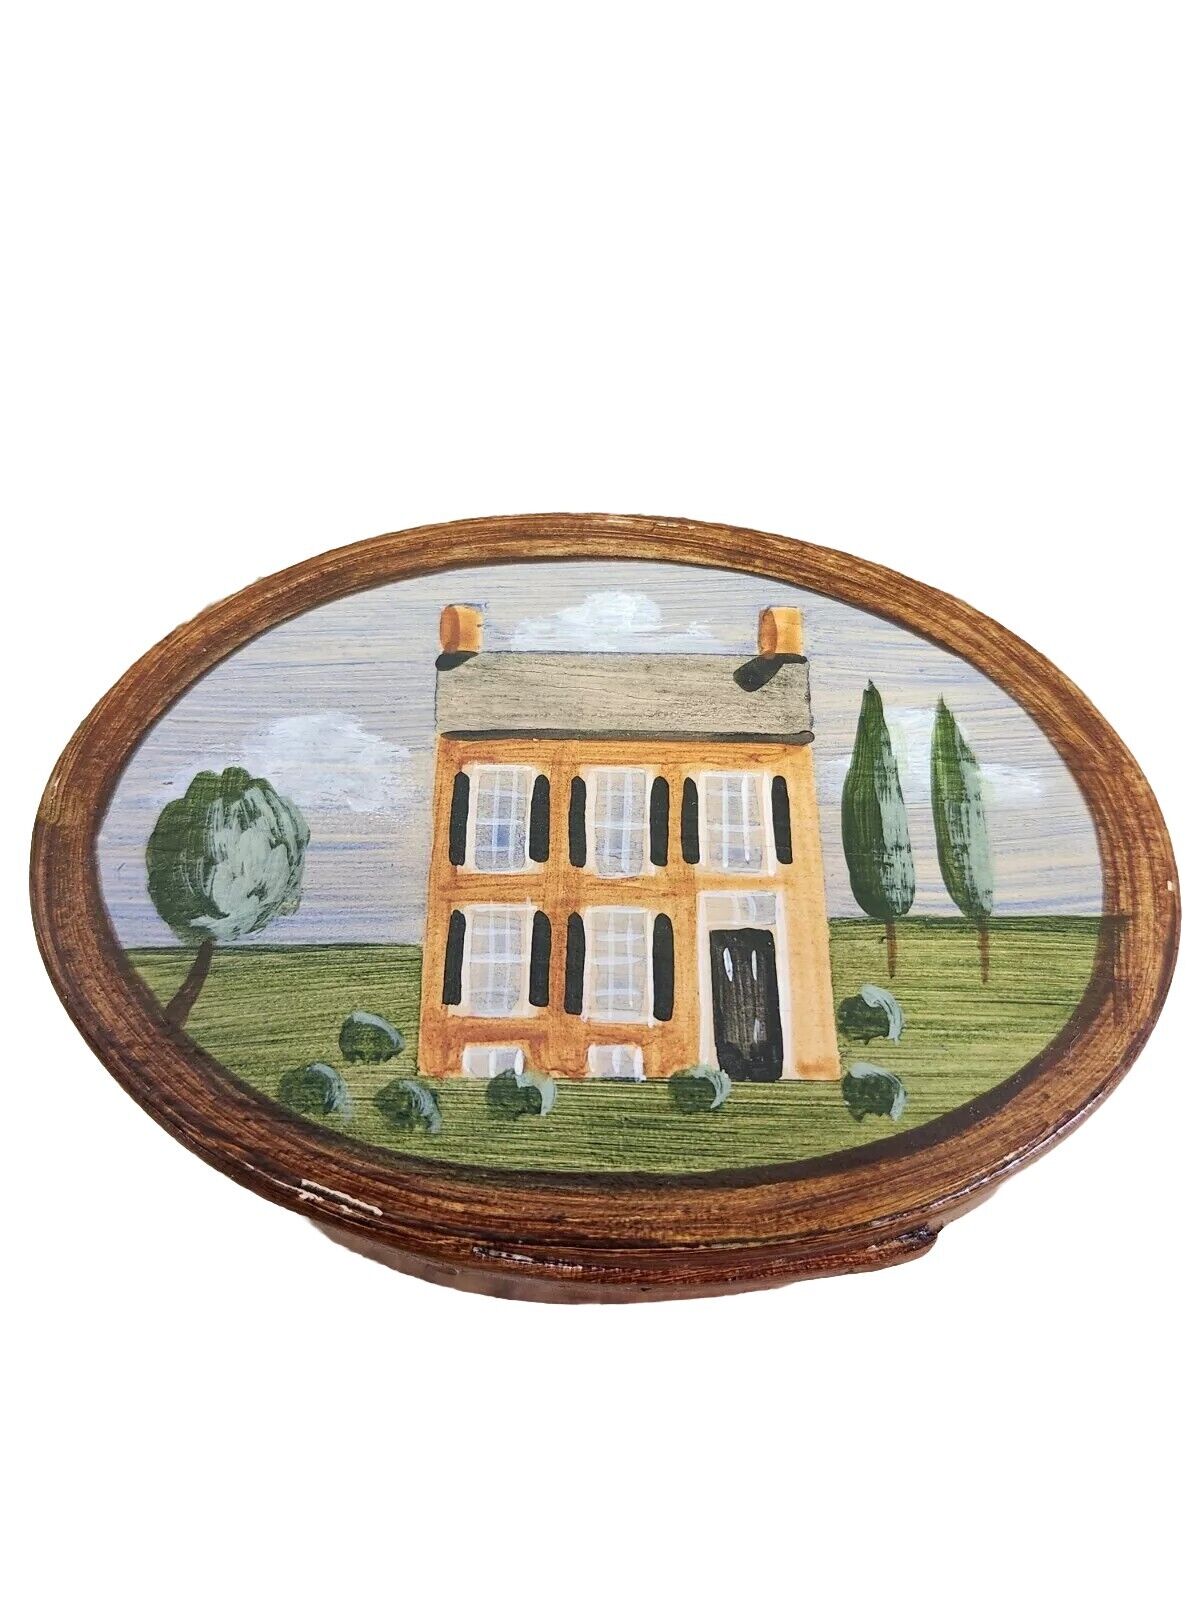 Shaker Style Painted Bentwood Box The Friends Frederick MD Painted House Sgd